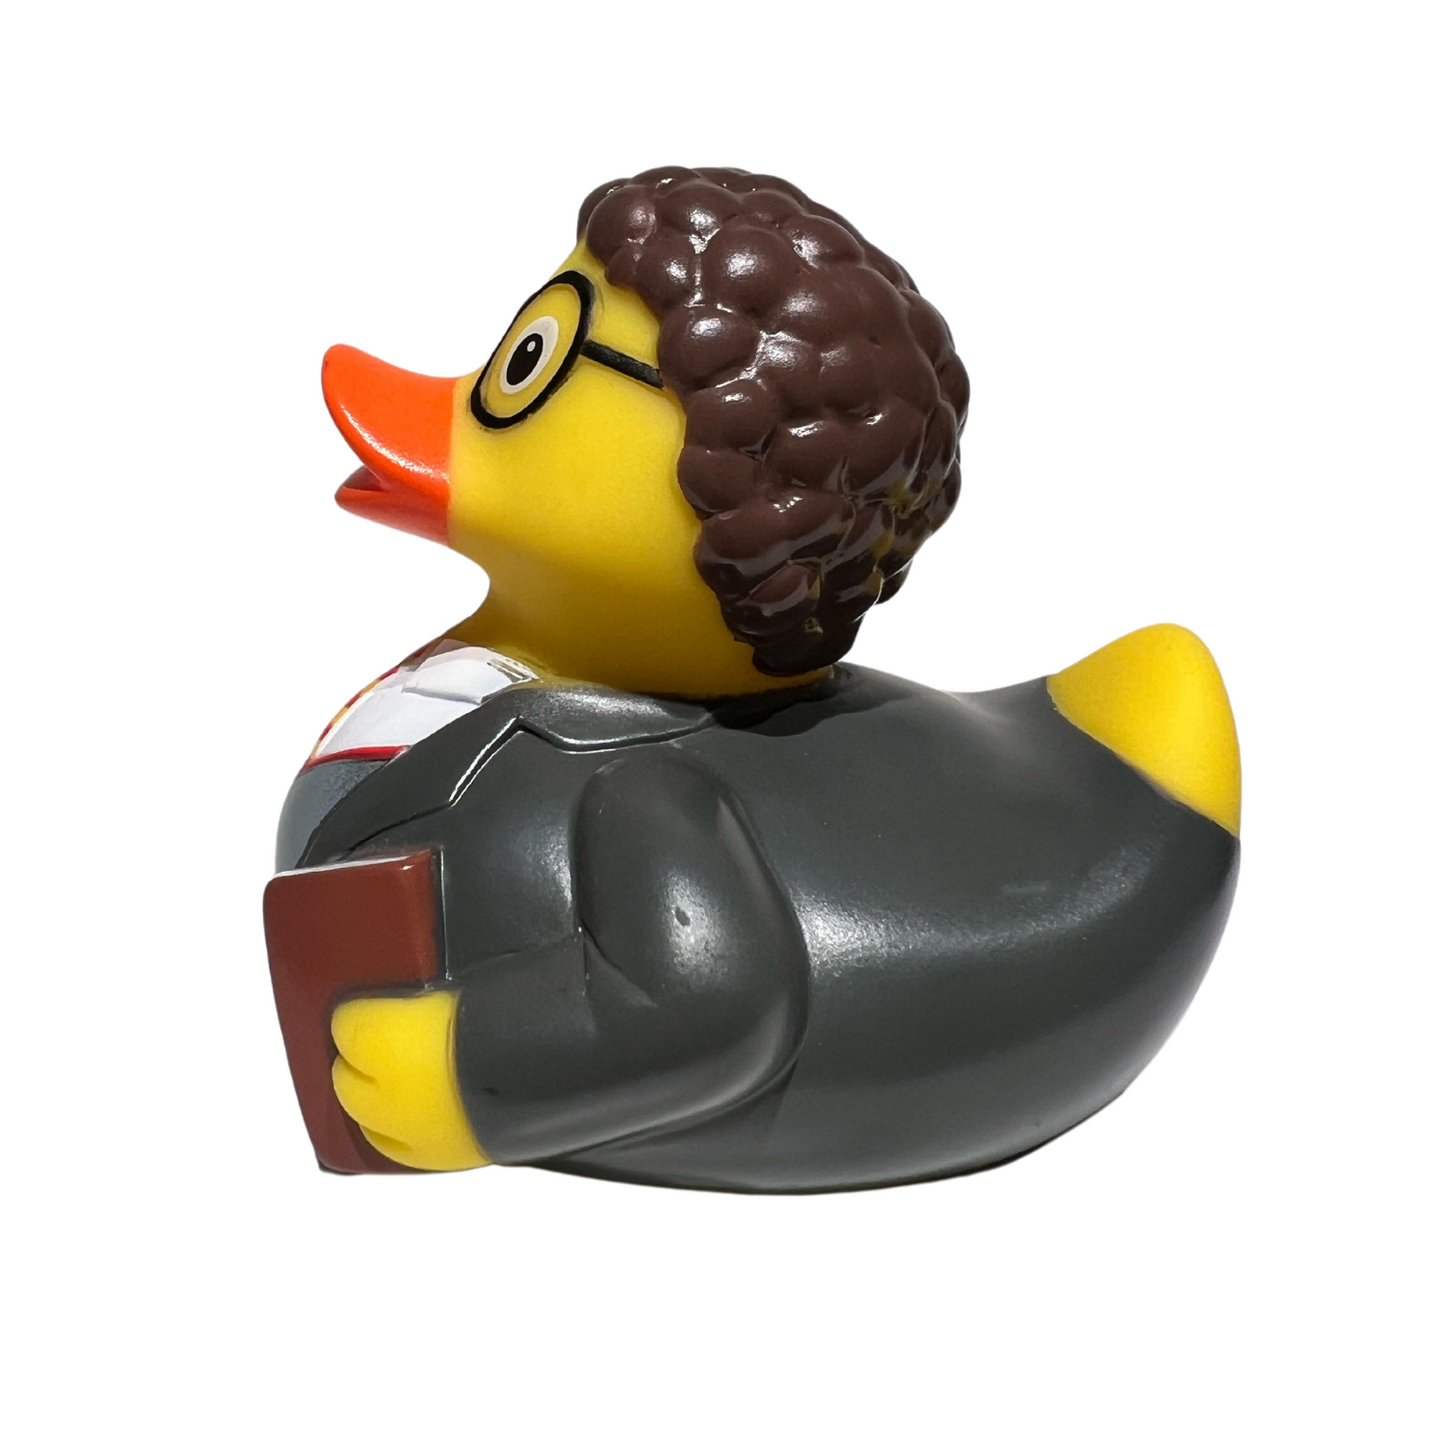 Harry Potter Rubber Duck Right Side View